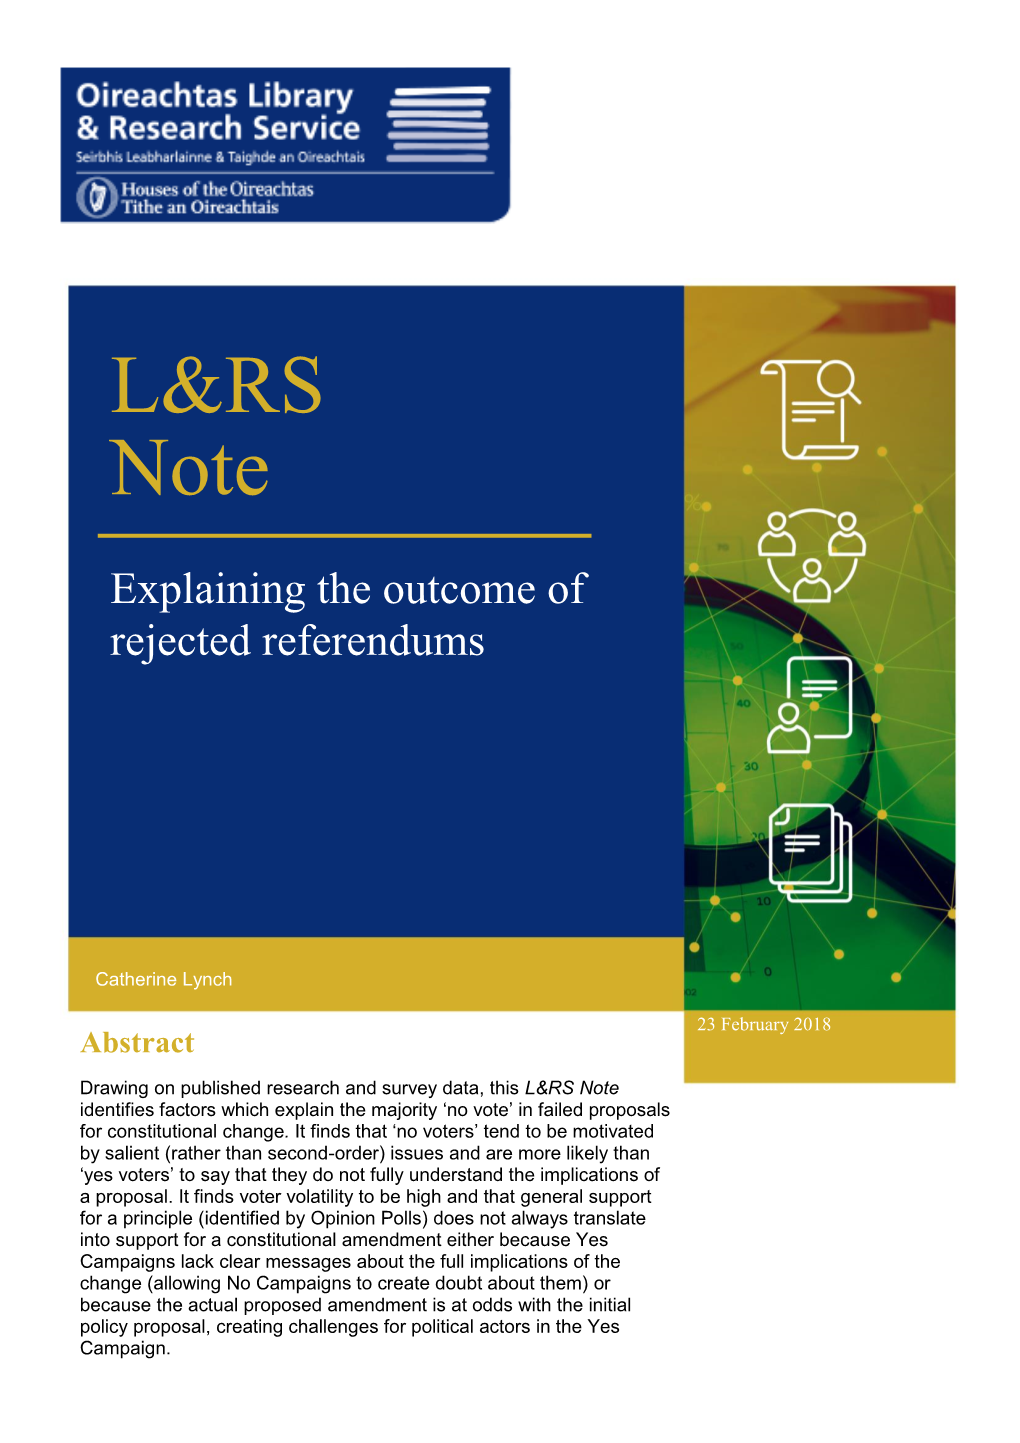 L&RS Note: Explaining the Outcome of Rejected Referendums (PDF)